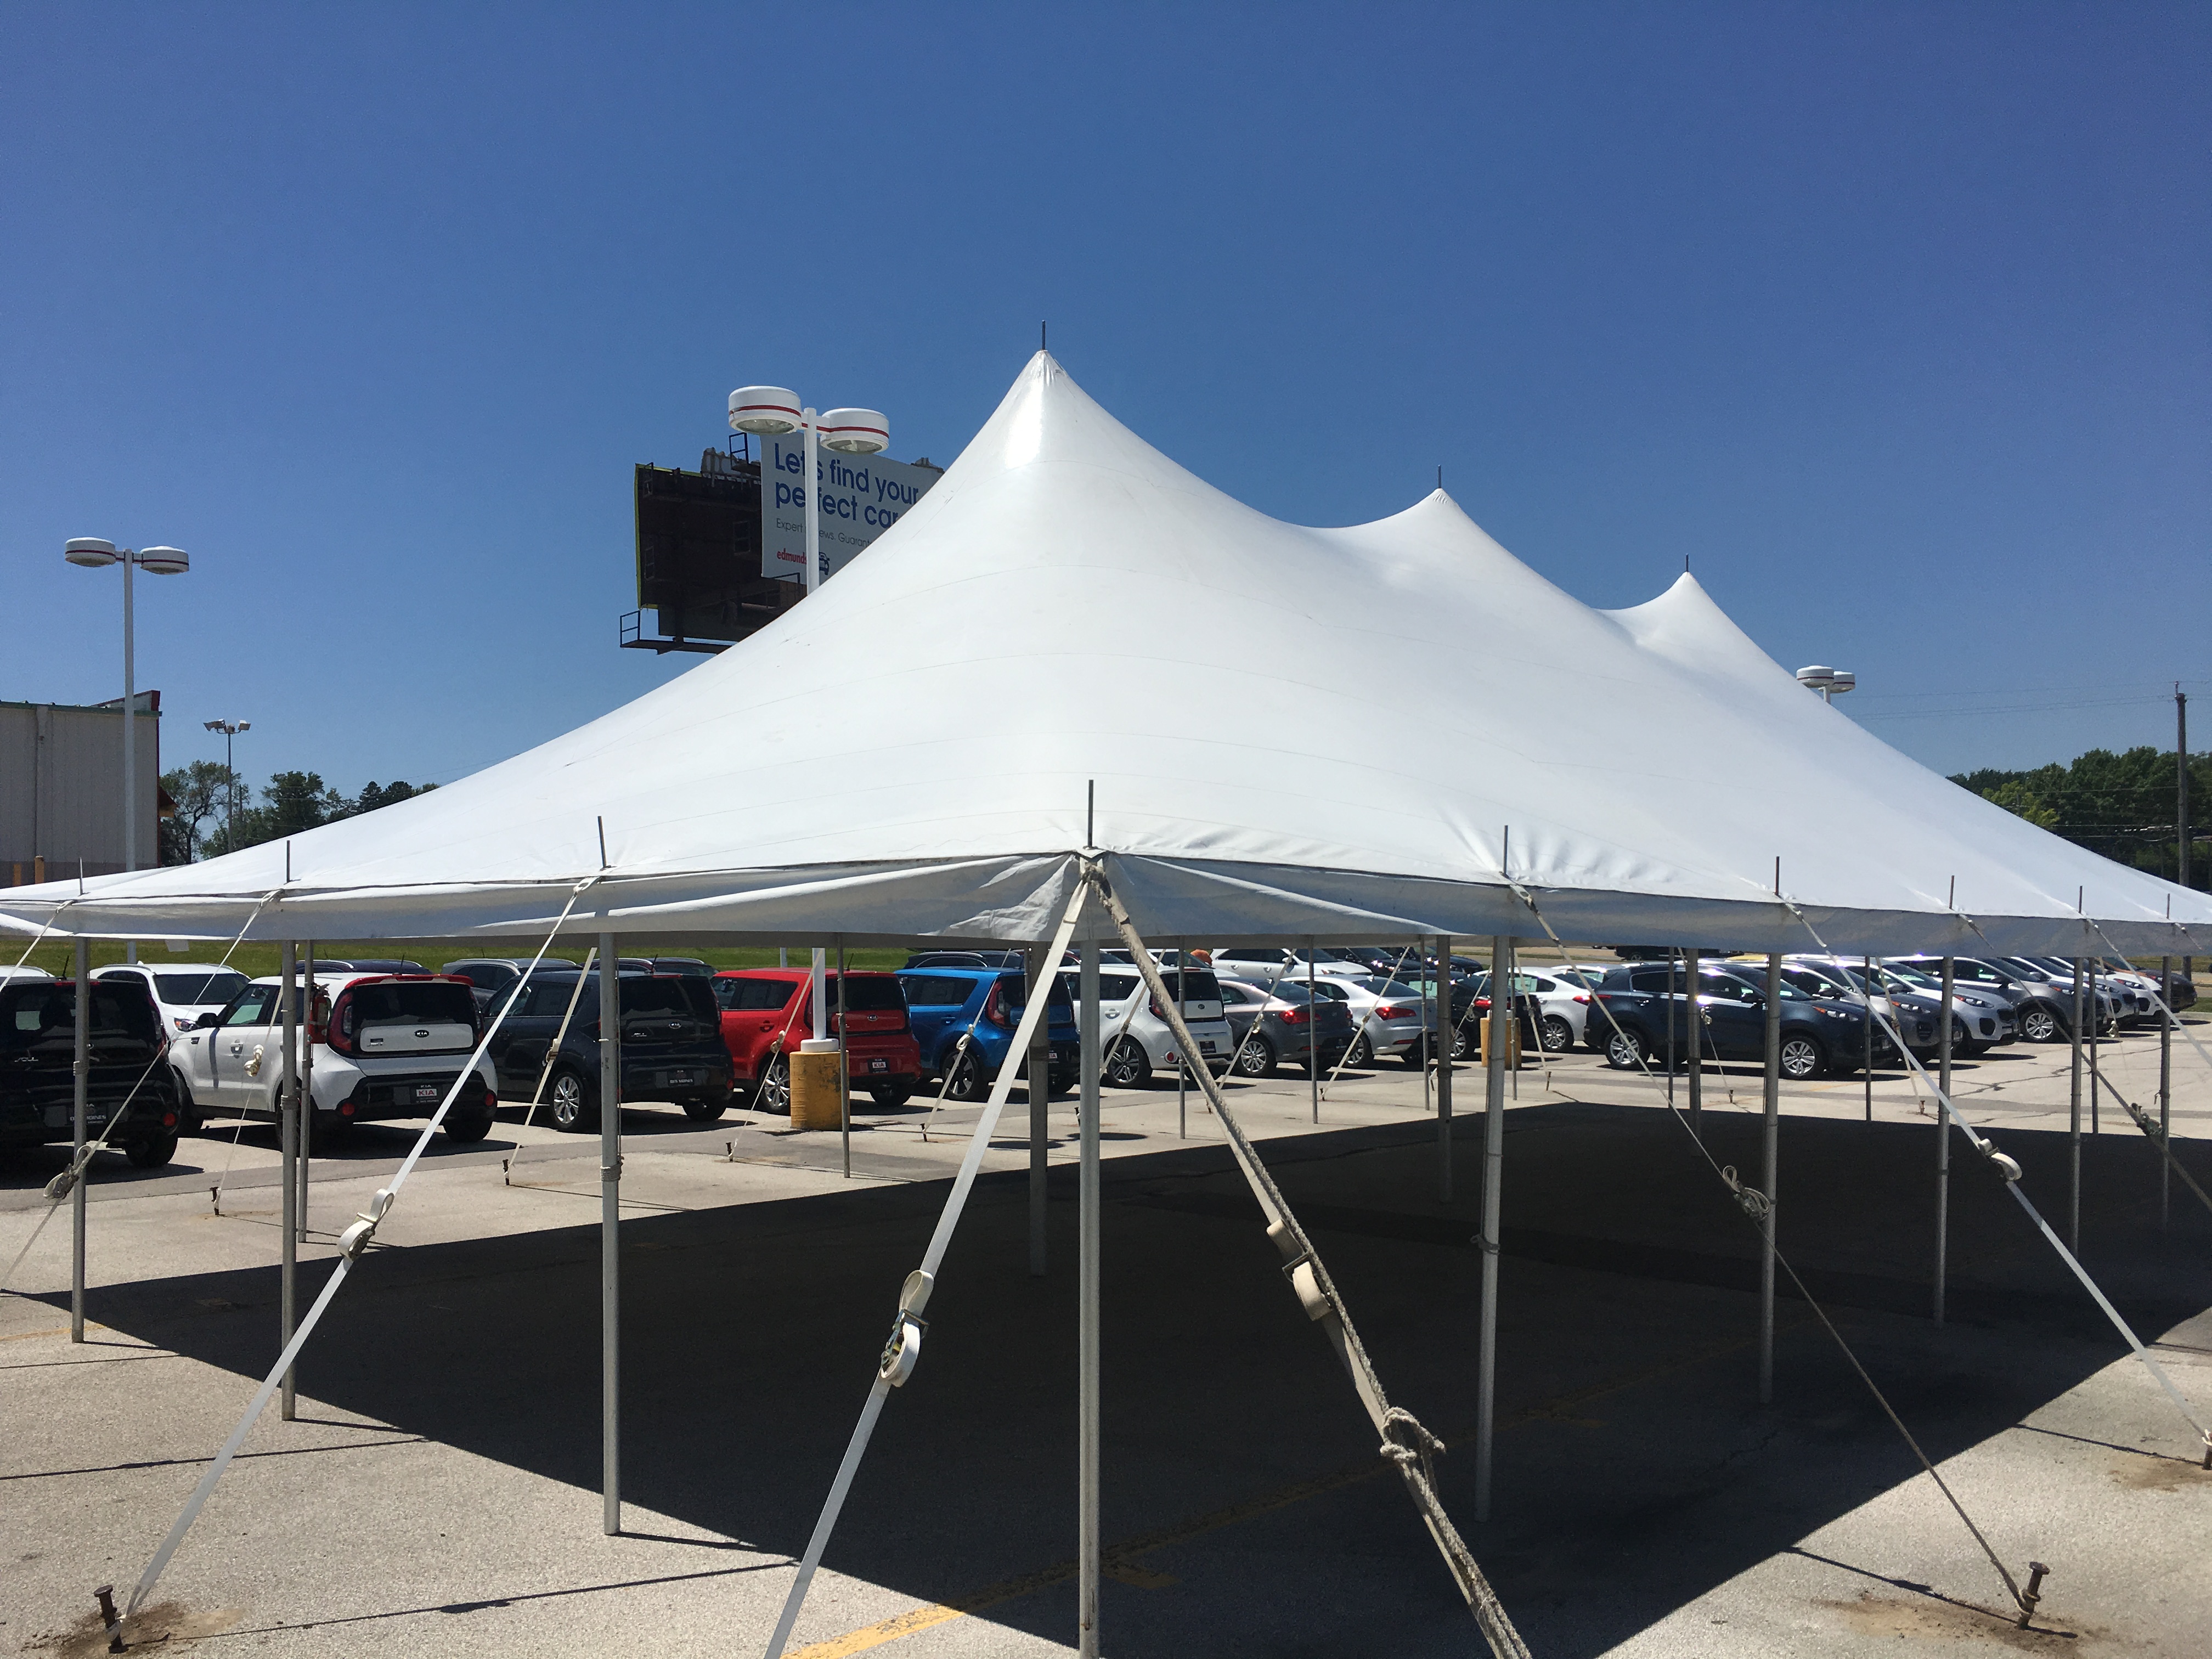 Rope and pole tent at dealership tent sale